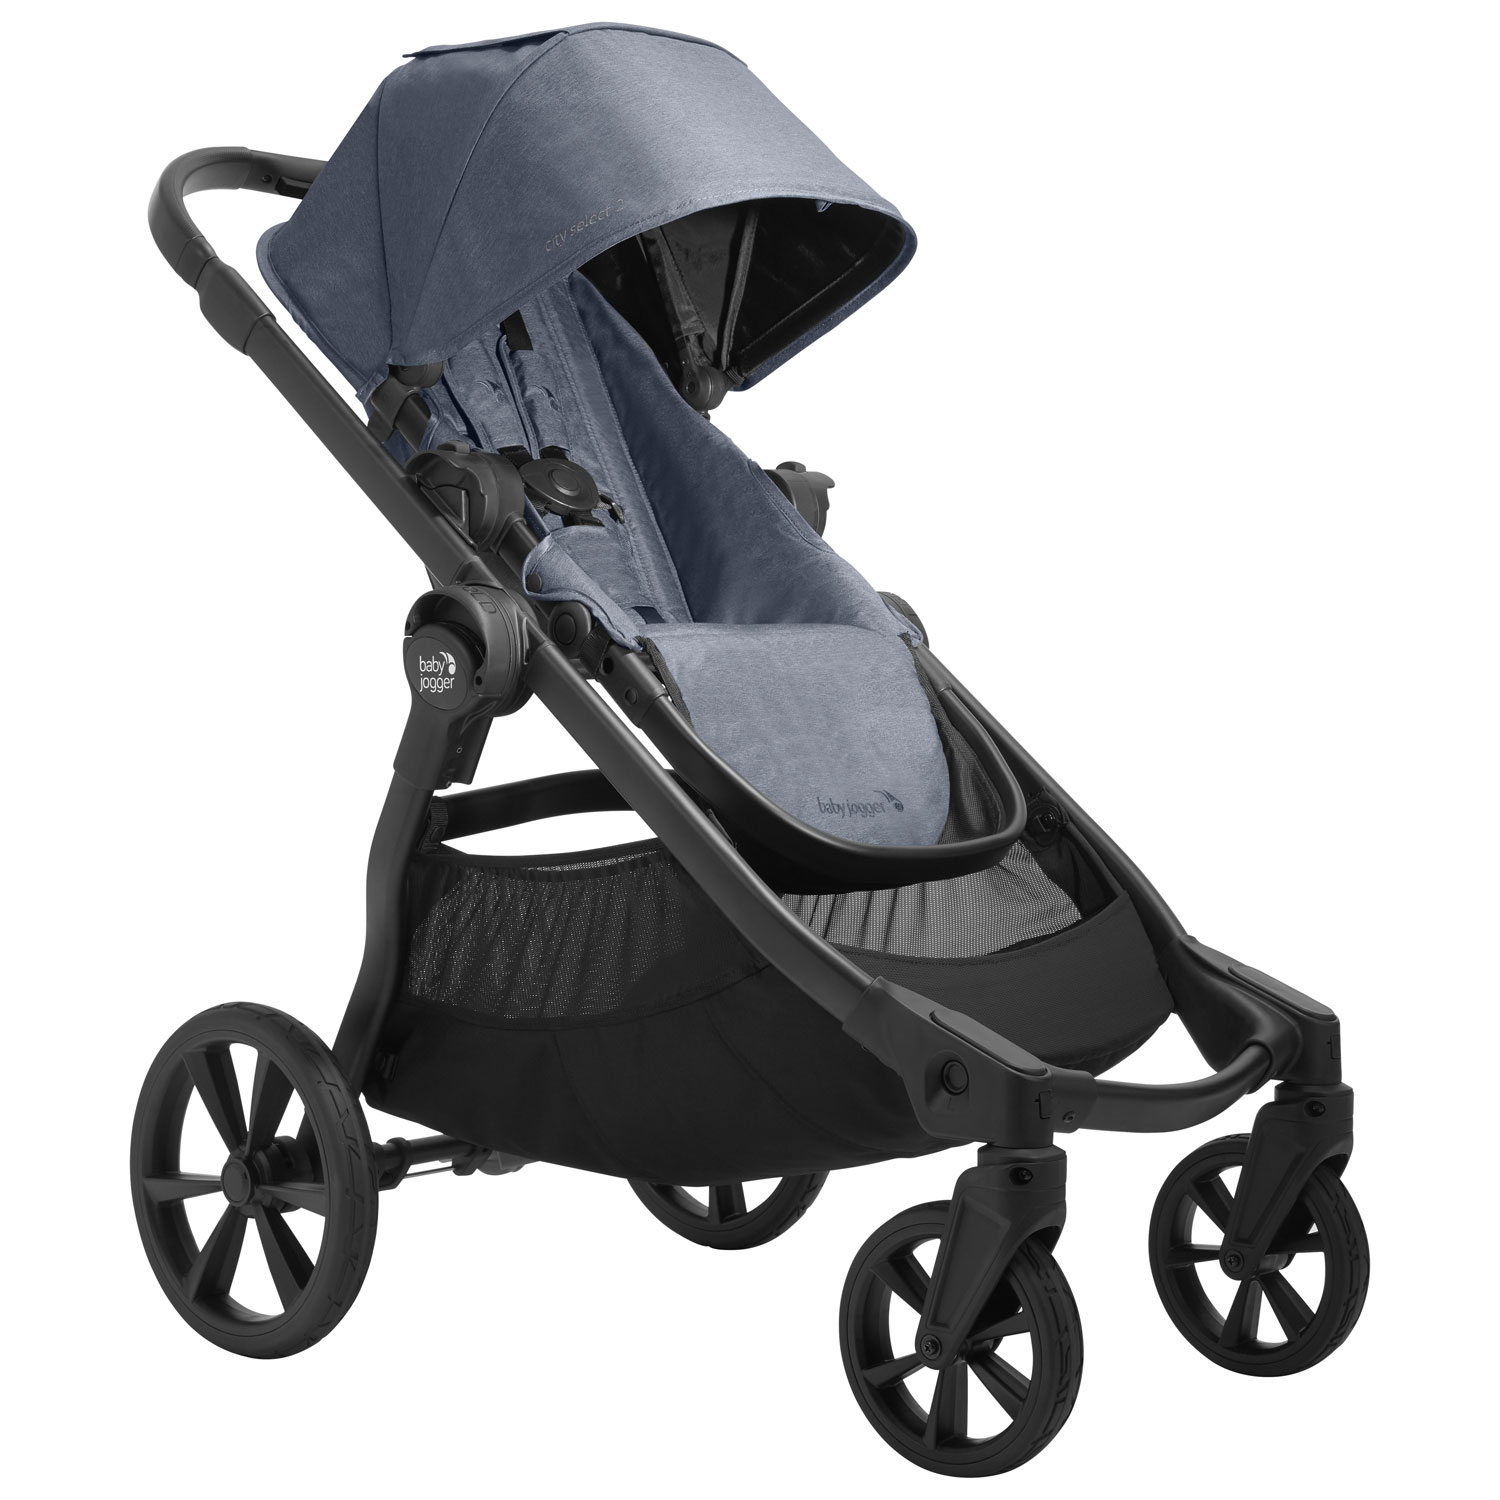 Baby Jogger City Select 2 Stroller - Peacoat Blue